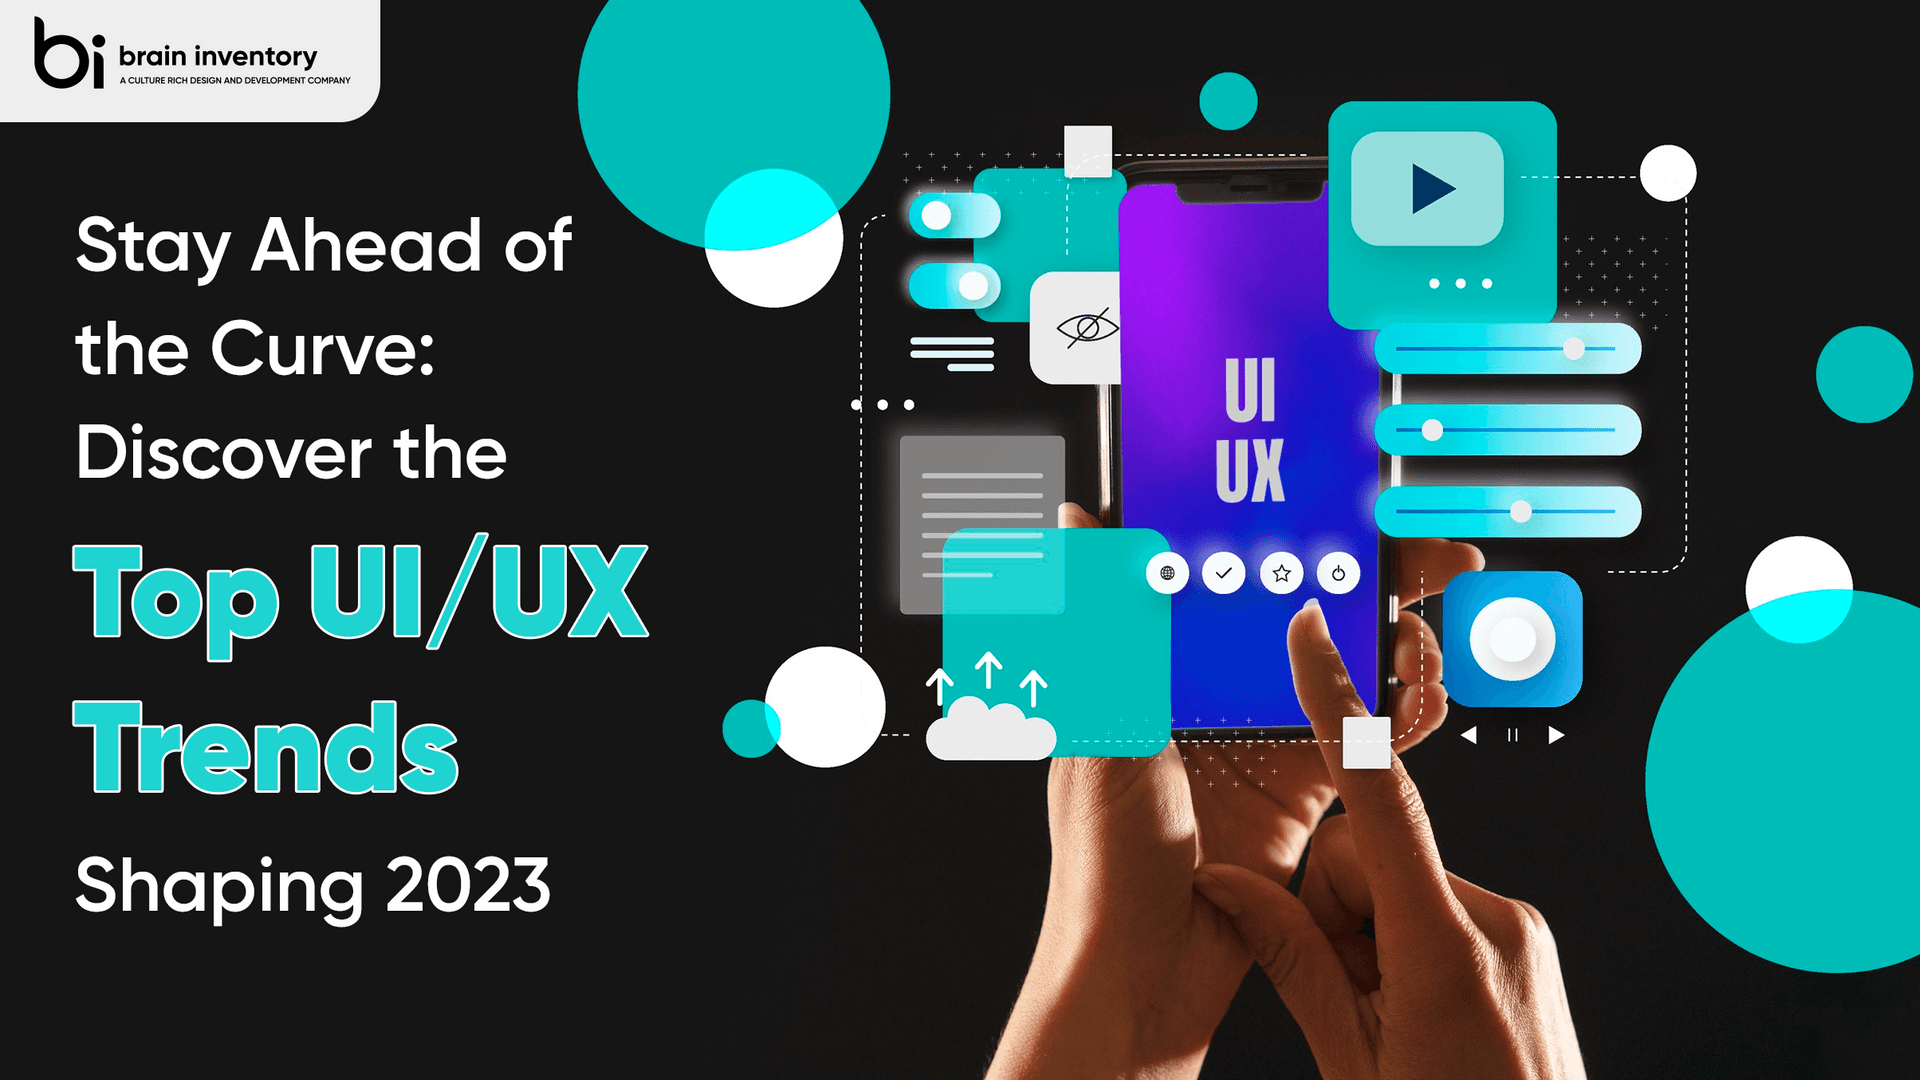 Stay Ahead of the Curve: Discover the Top UI/UX Trends Shaping 2023